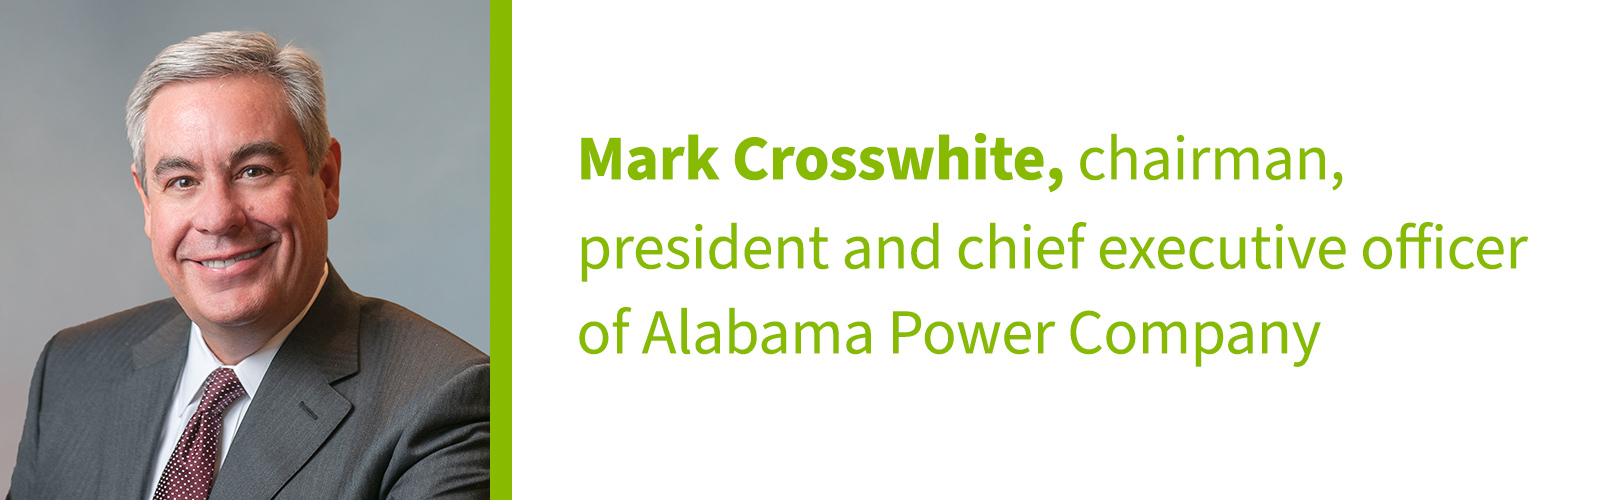 Mark Crosswhite: chairman, president and chief executive officer of Alabama Power Company